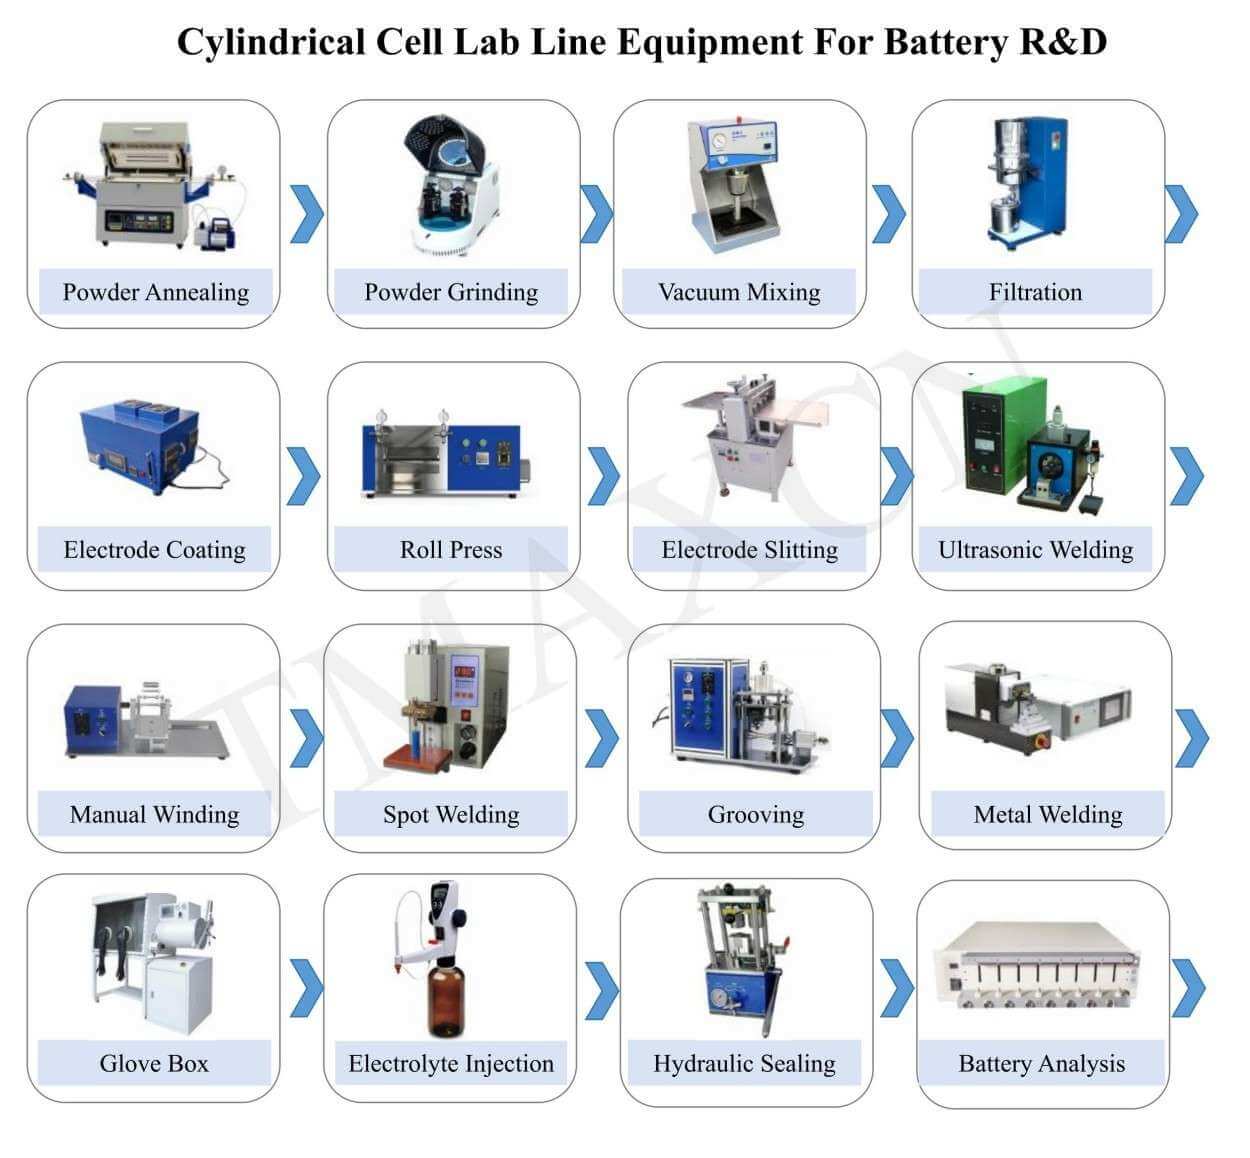 Cylindrical Cell R&D Line